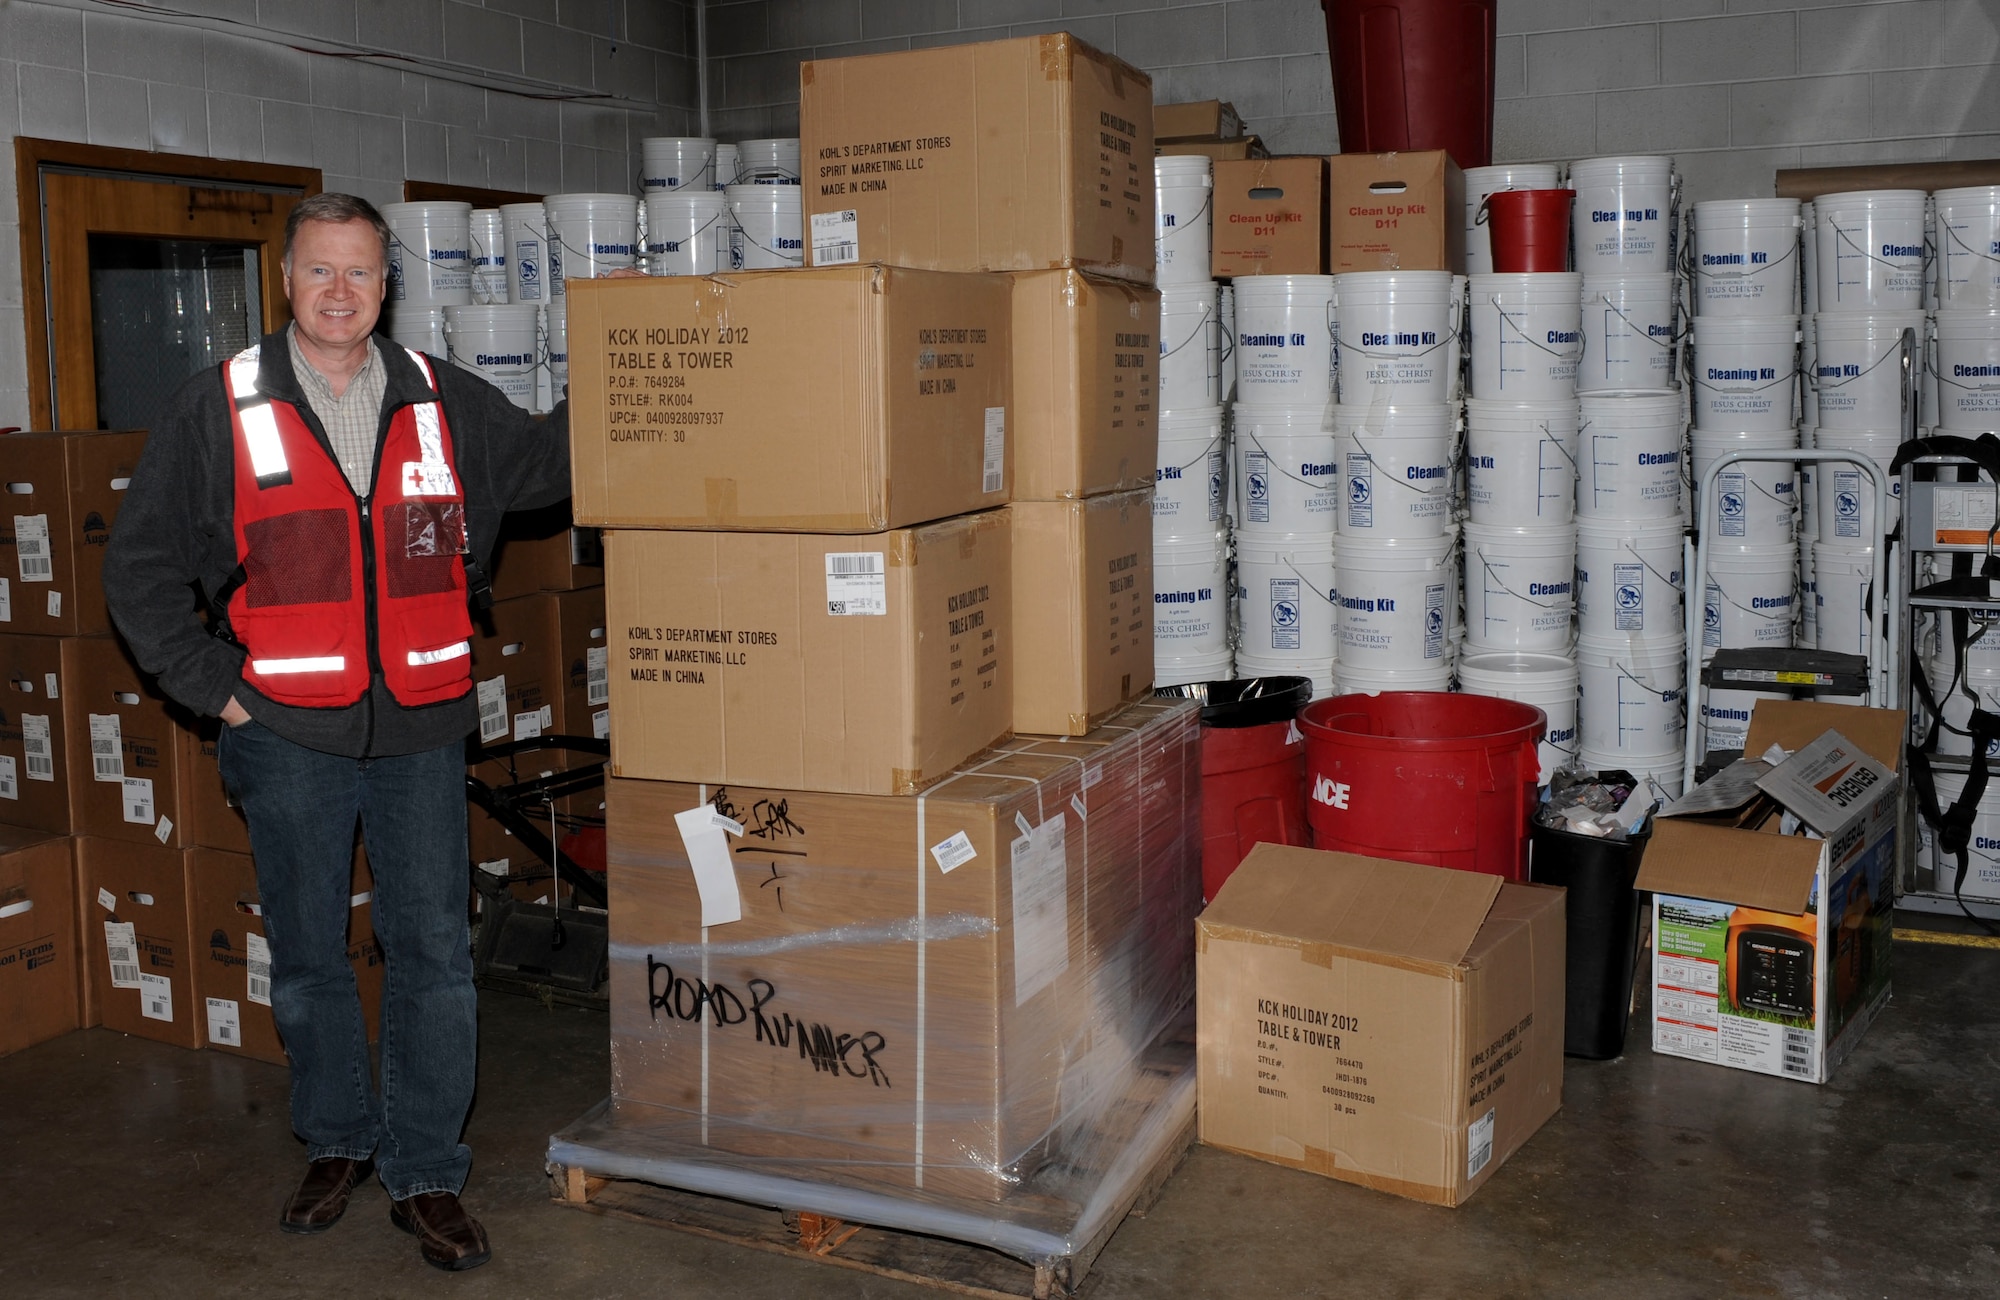 Dan Kuecker, American Red Cross Regional Emergency Services director, displays the recent supplies received for future emergencies at the Black Hills Area Chapter of the American Red Cross in Rapid City, S.D., March 22, 2013. The new supplies included a new four-wheel drive truck, electric generators, buckets of non-perishable meals, and water purification systems. (U.S. Air Force photo by Airman 1st Class Anania Tekurio/Released)